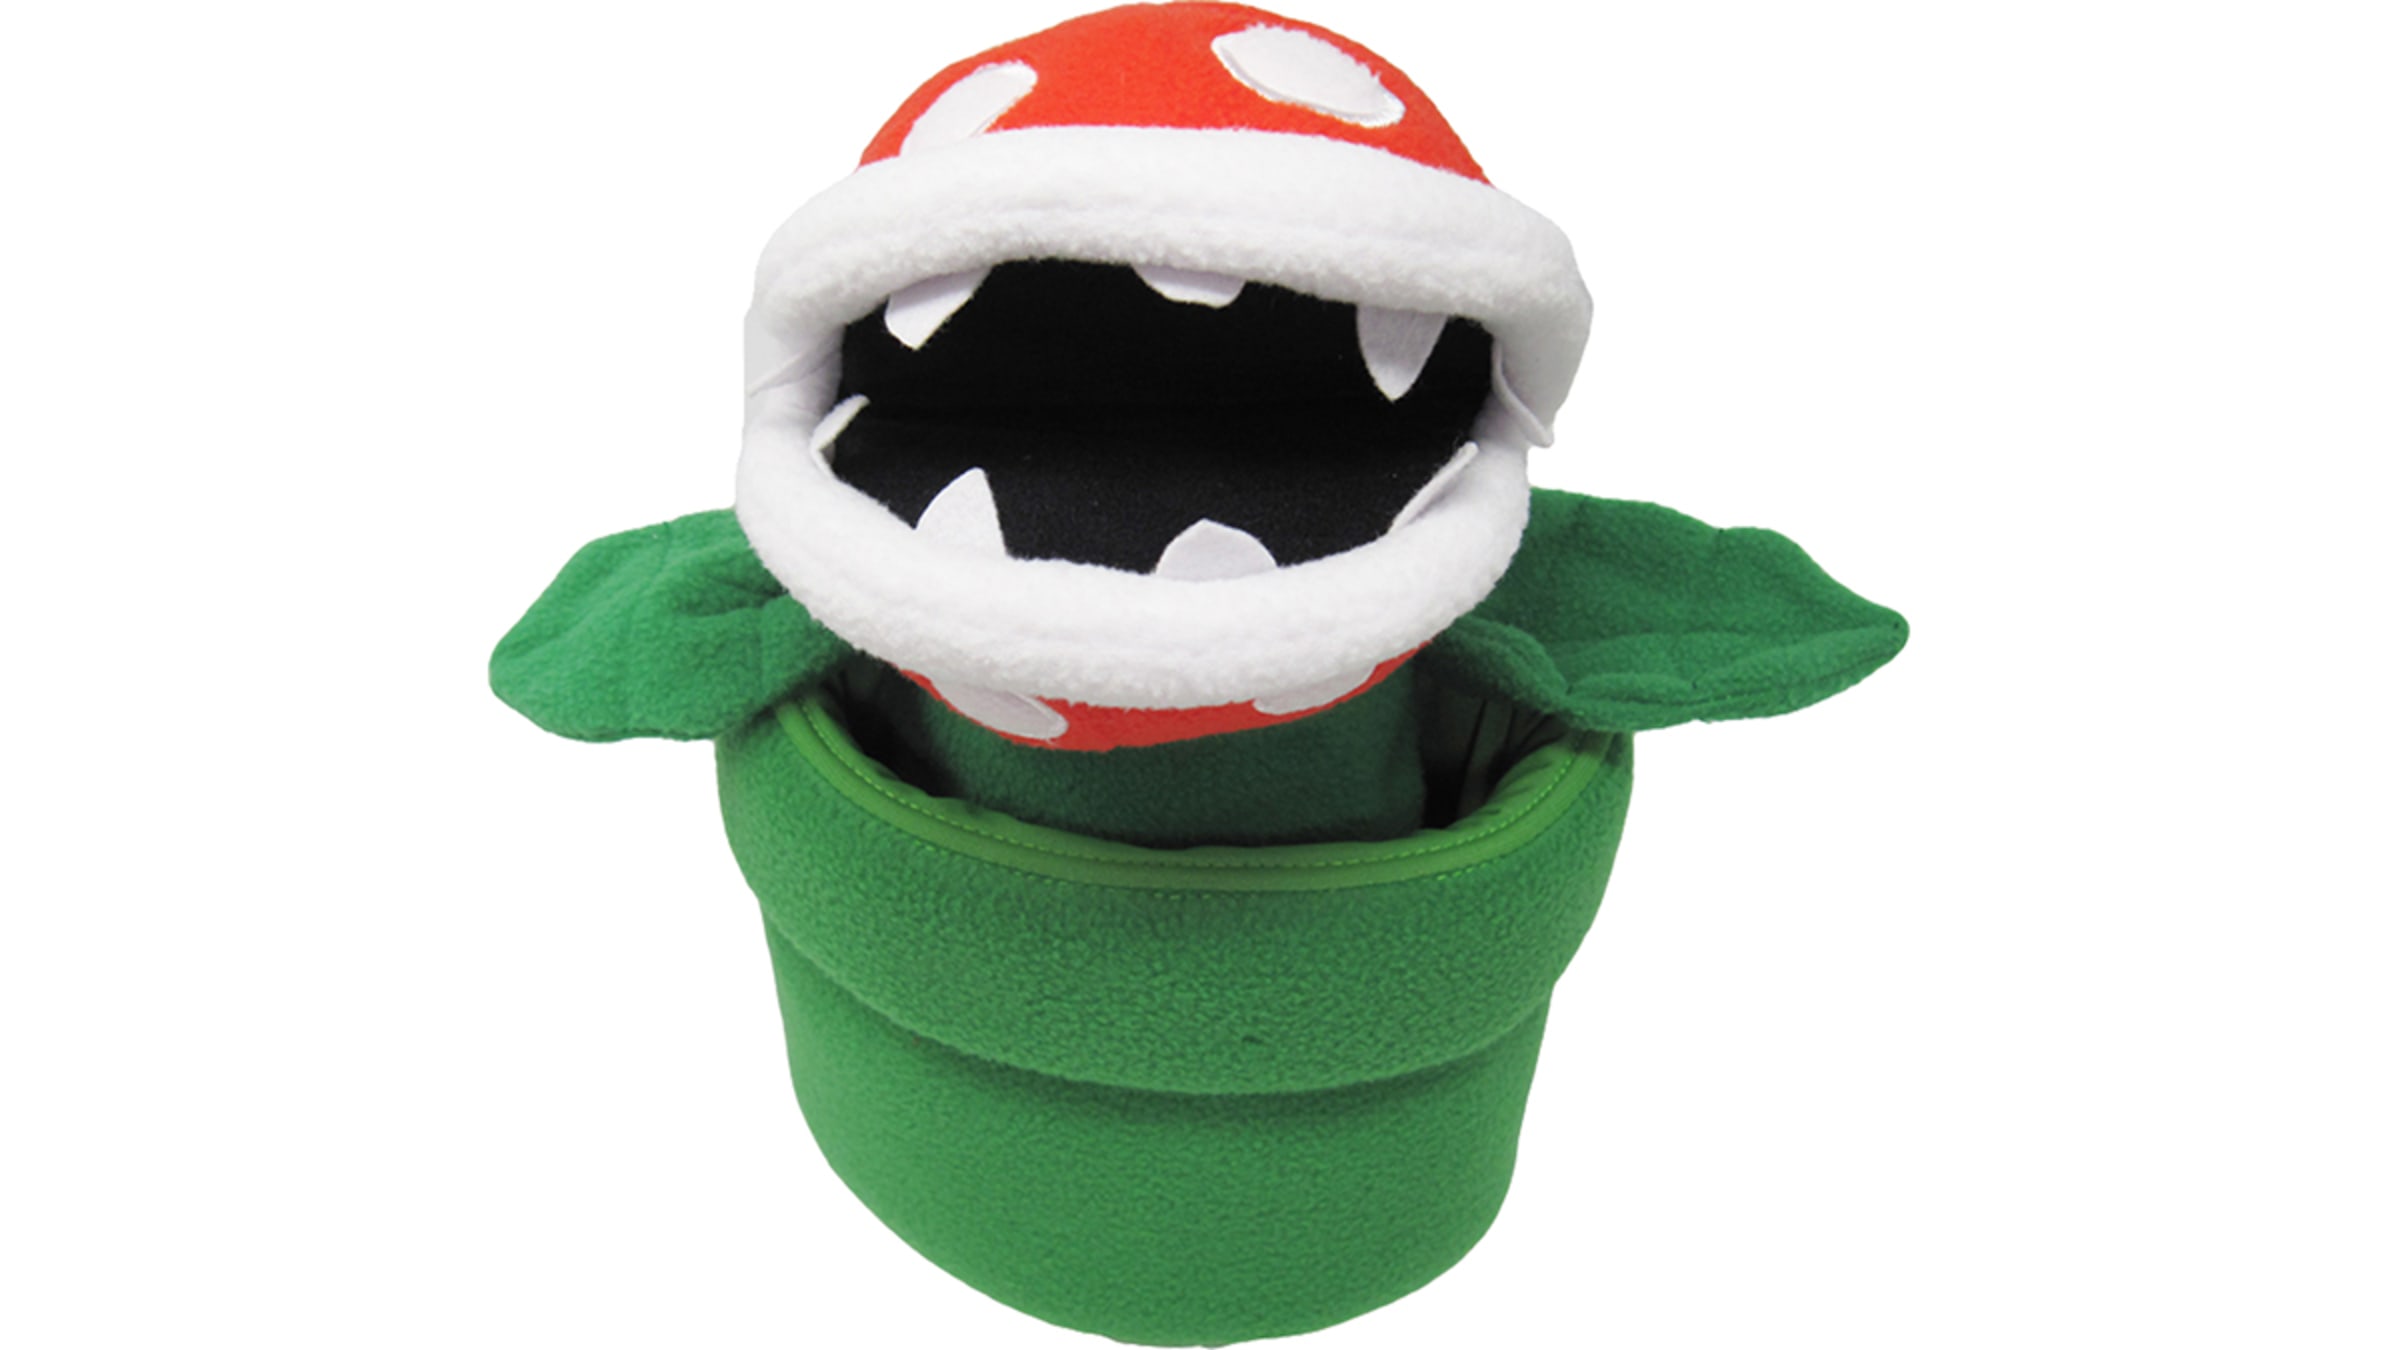 Yoshi Puppet – Hashtag Collectibles